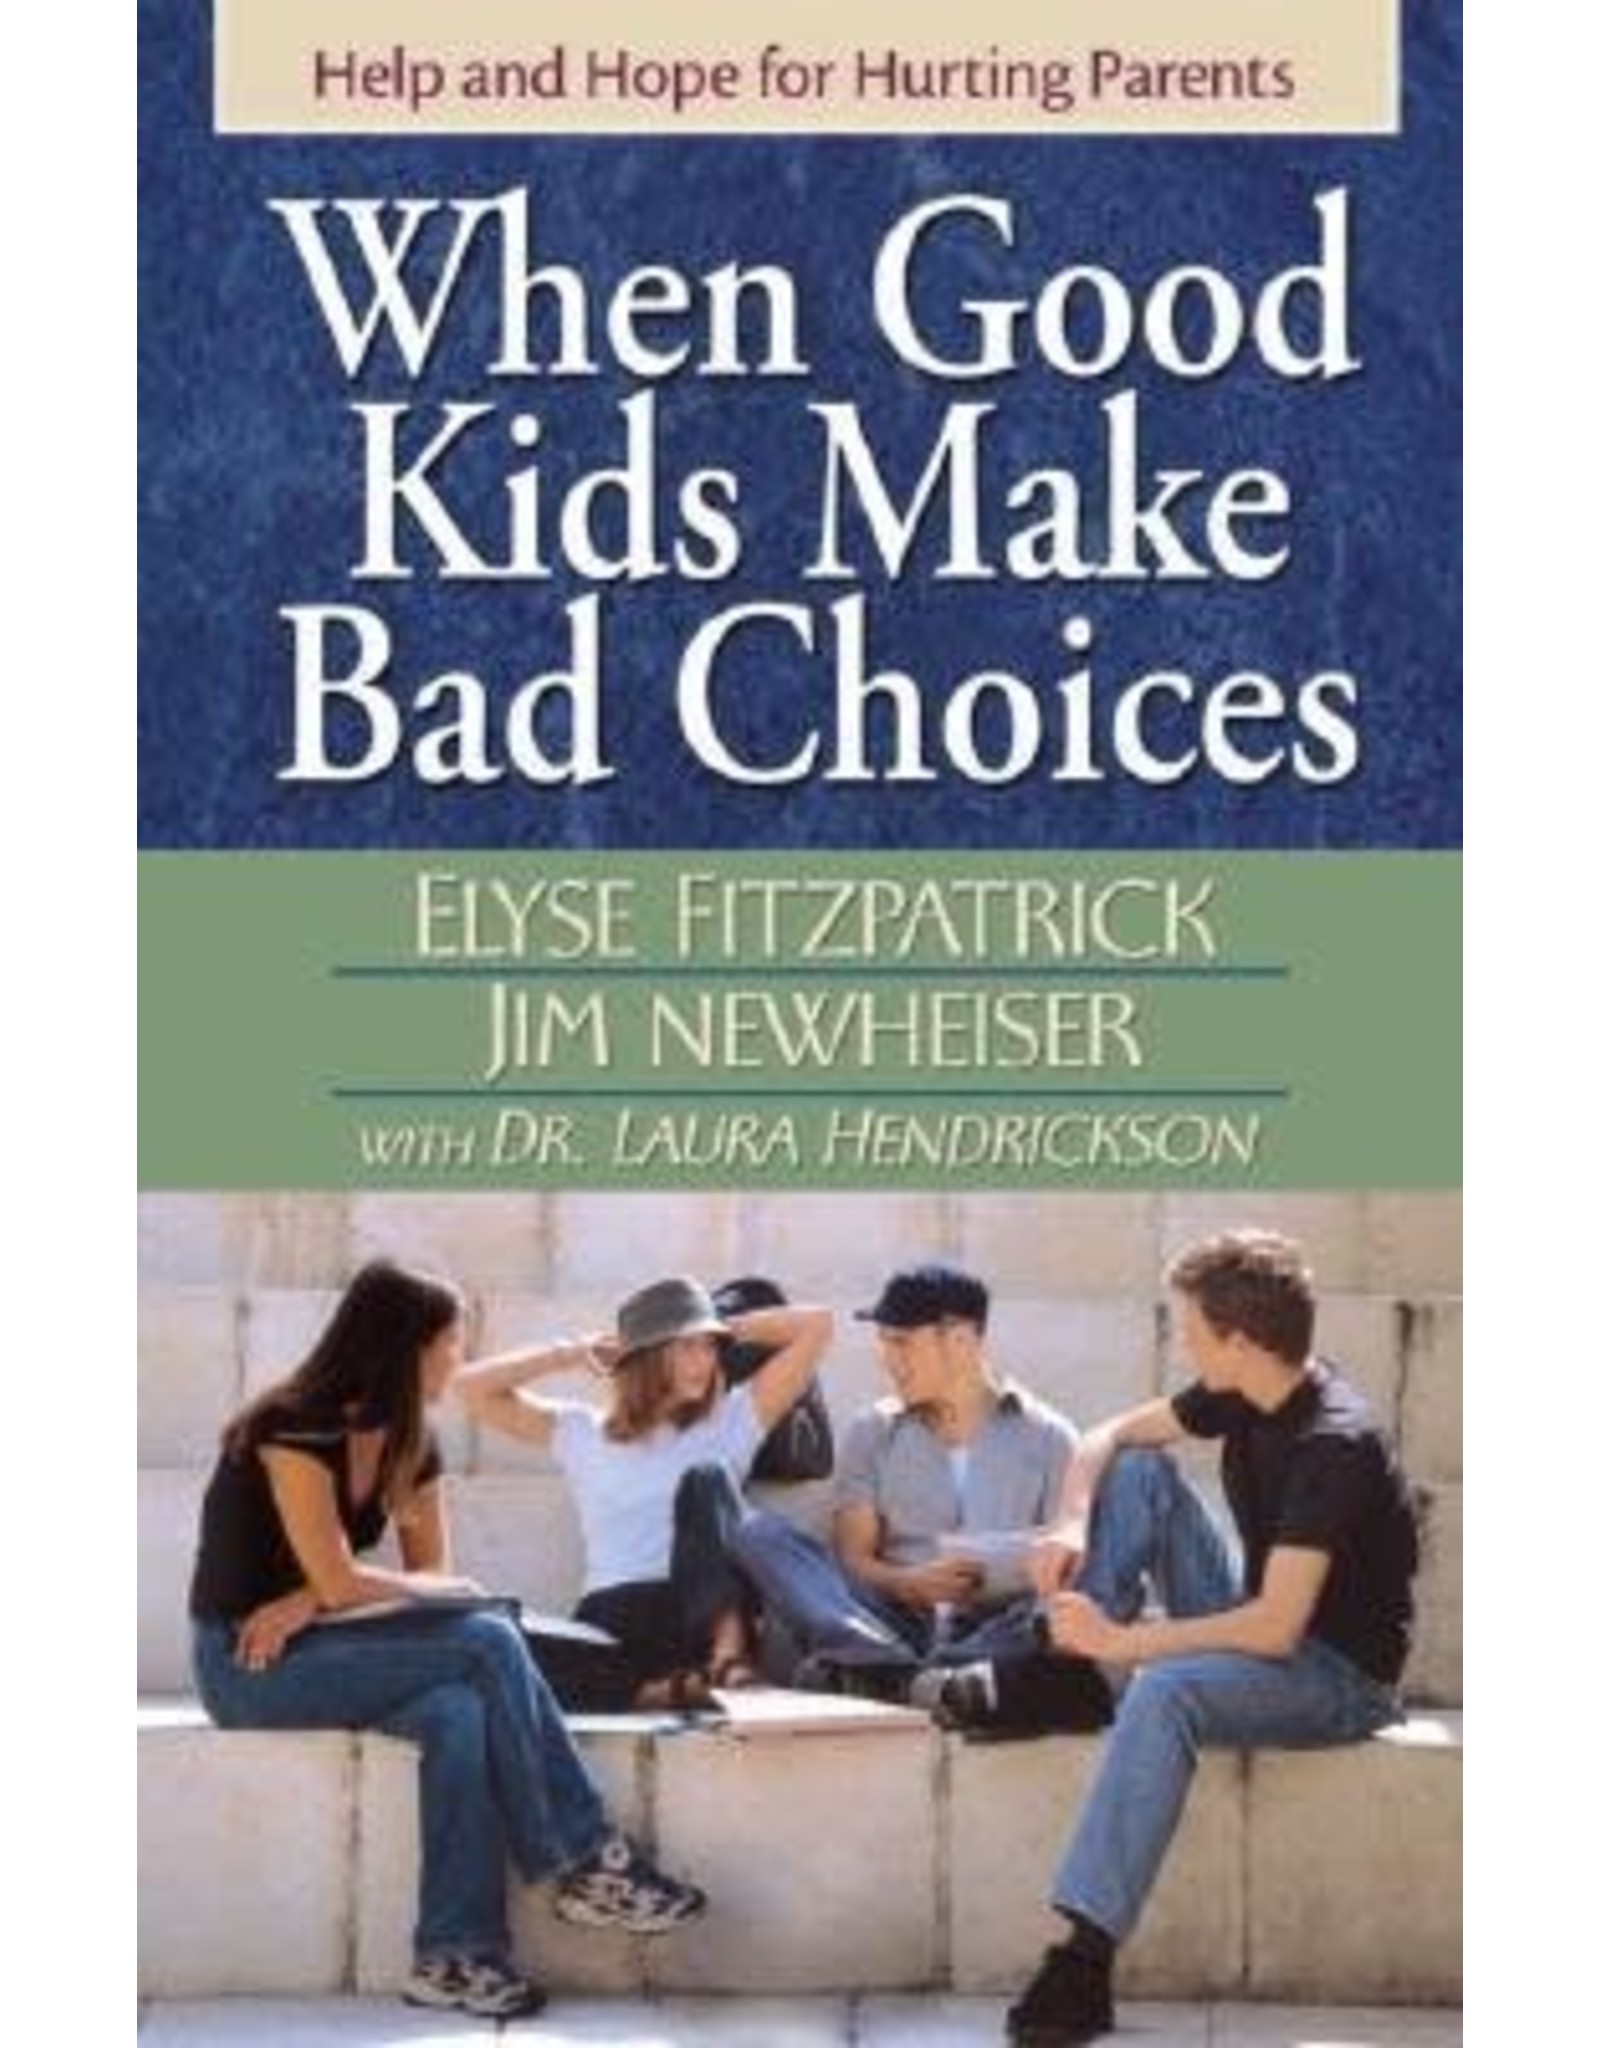 Elyse Fitzpatrick, James Newheiser, & Laura Hendrickson When Good Kids Make Bad Choices: Help and Hope for Hurting Parents